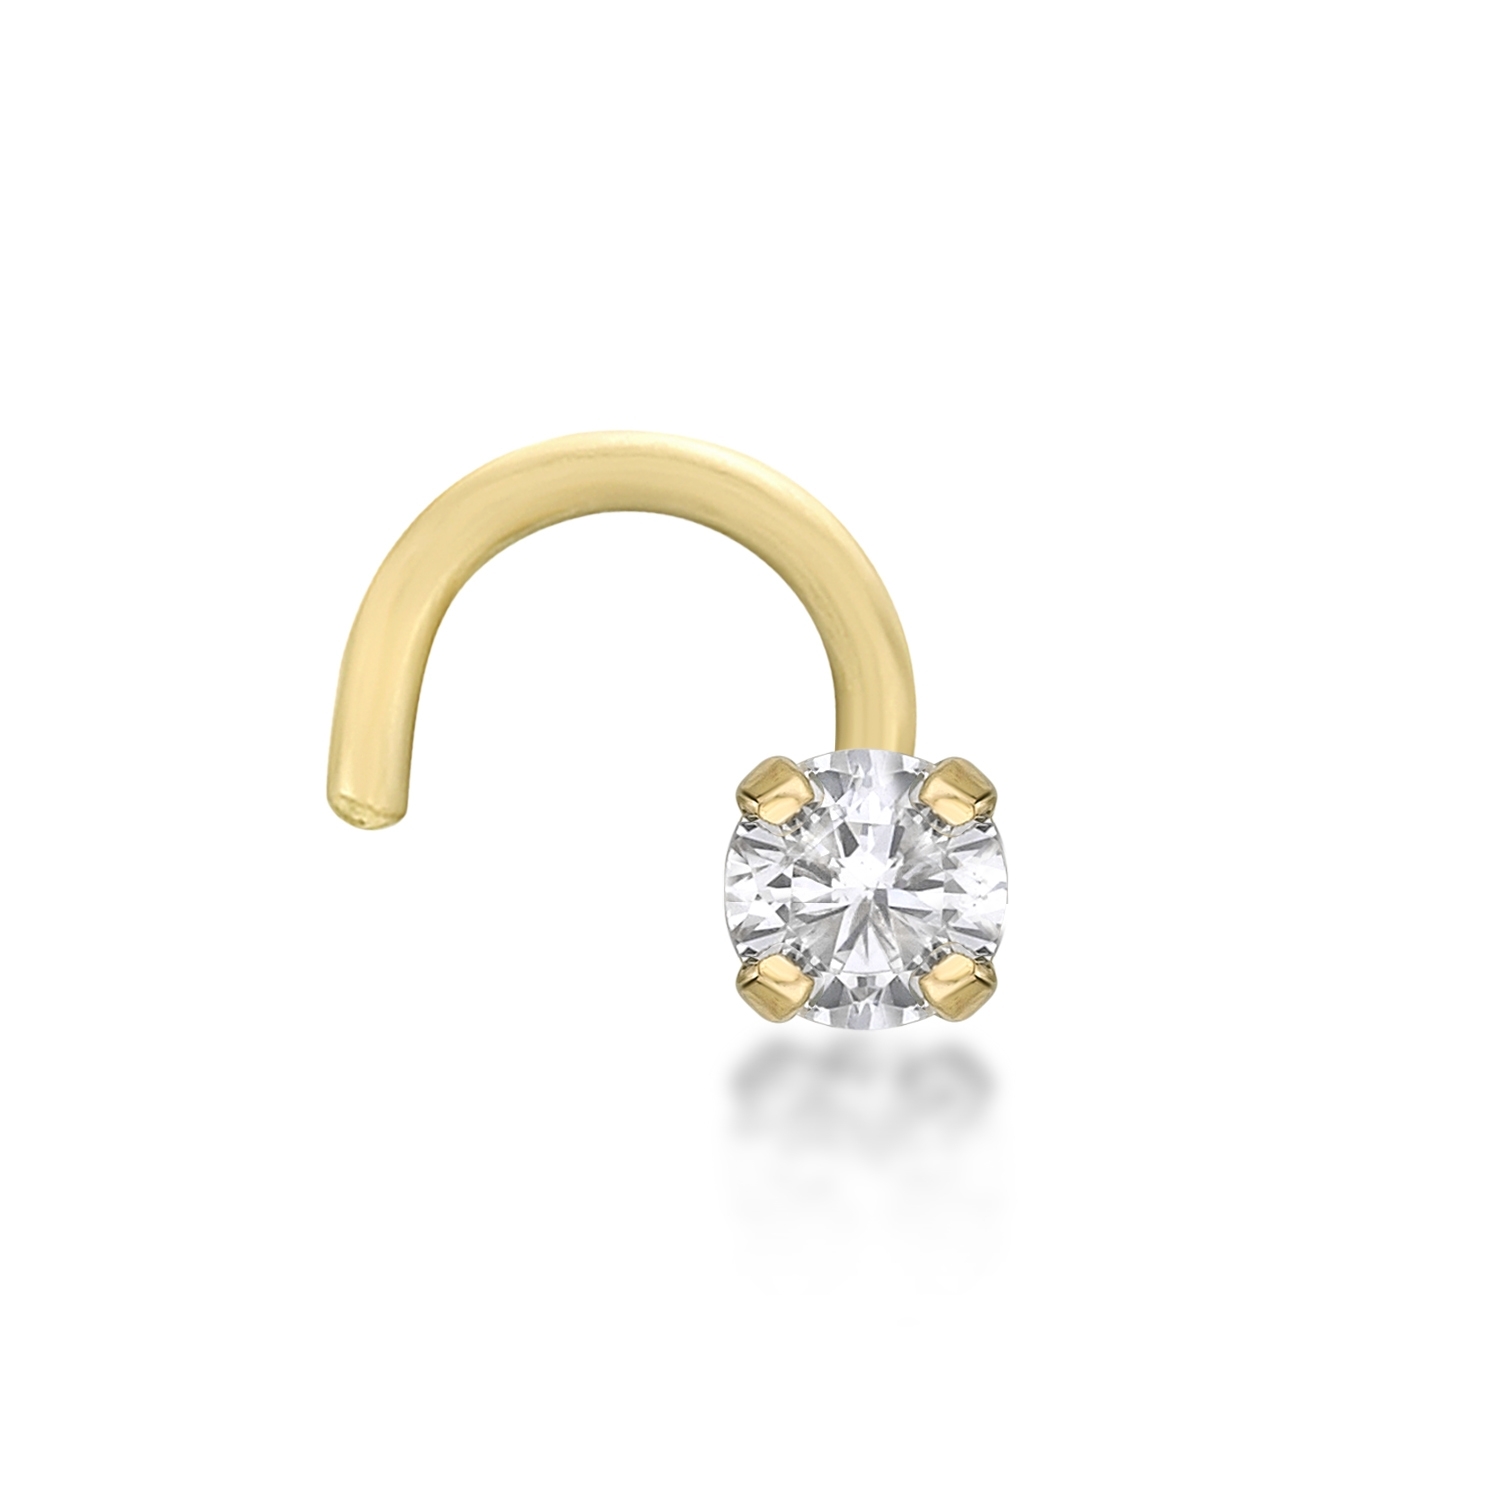 50743-nose-ring-default-collection-yellow-gold-white-diamond-0-07-h-i2-i3-50743.jpg